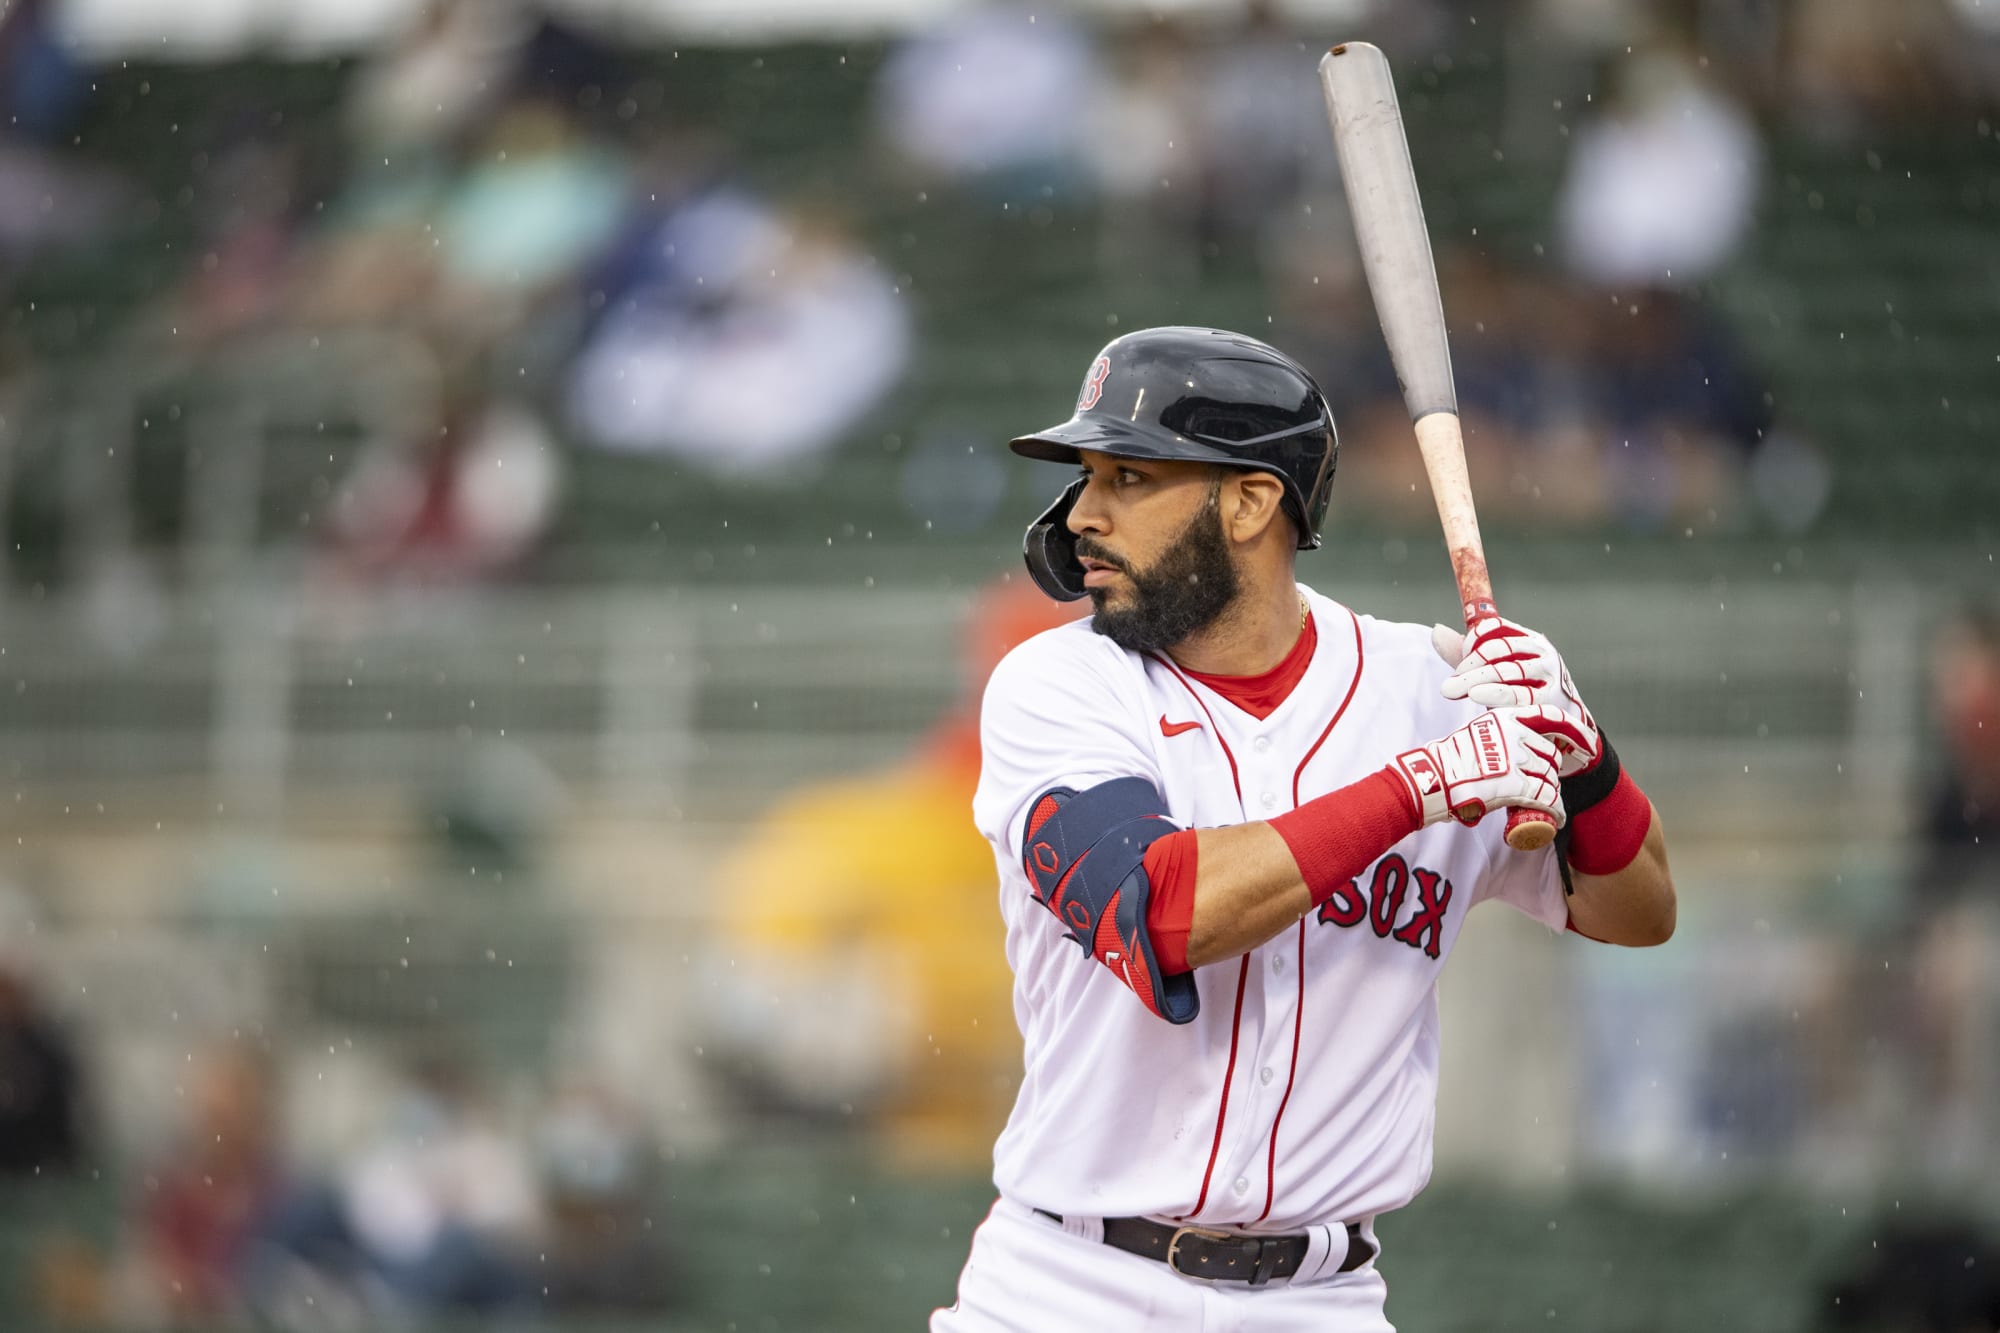 Red Sox: Marwin Gonzalez is key for this team as an elite utility player